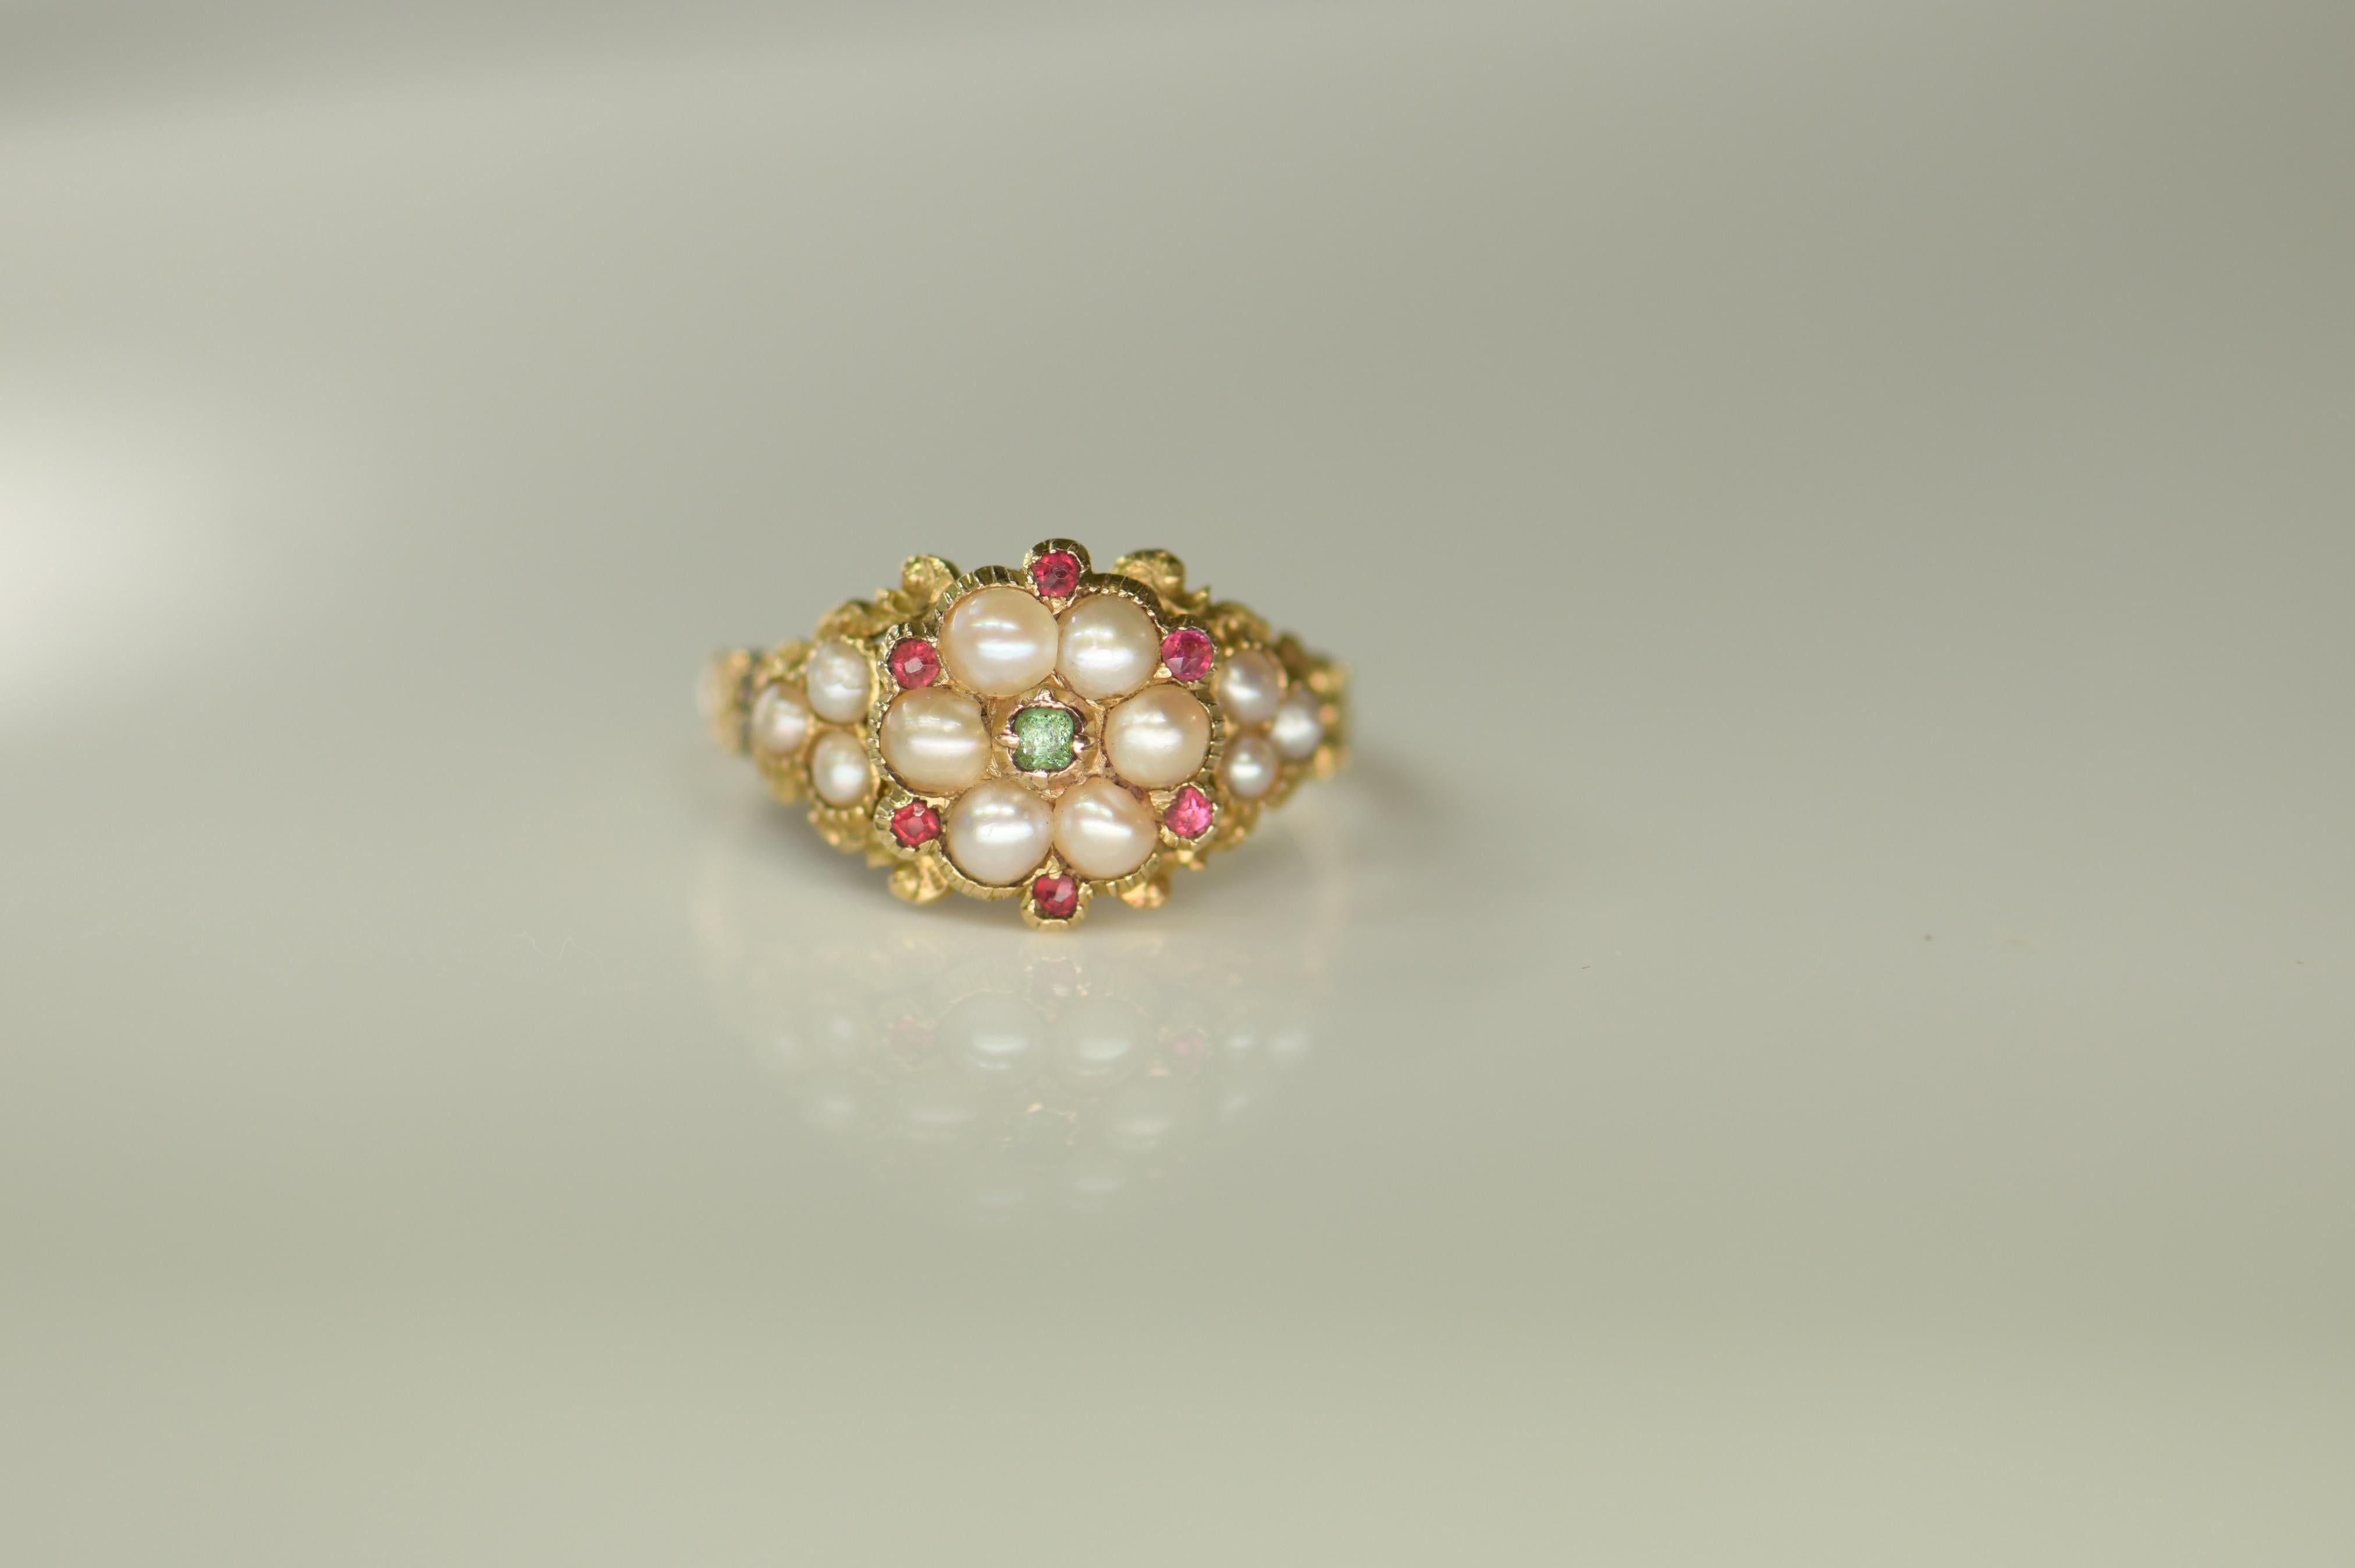 A really lovely 18ct gold Gorigia ring set with four small rubies with four natural split pearls and four smaller ones. In the centre is an emerald. The ring is of quatrefoil design with lovely repousse foliate work in the shoulders. 

Circa